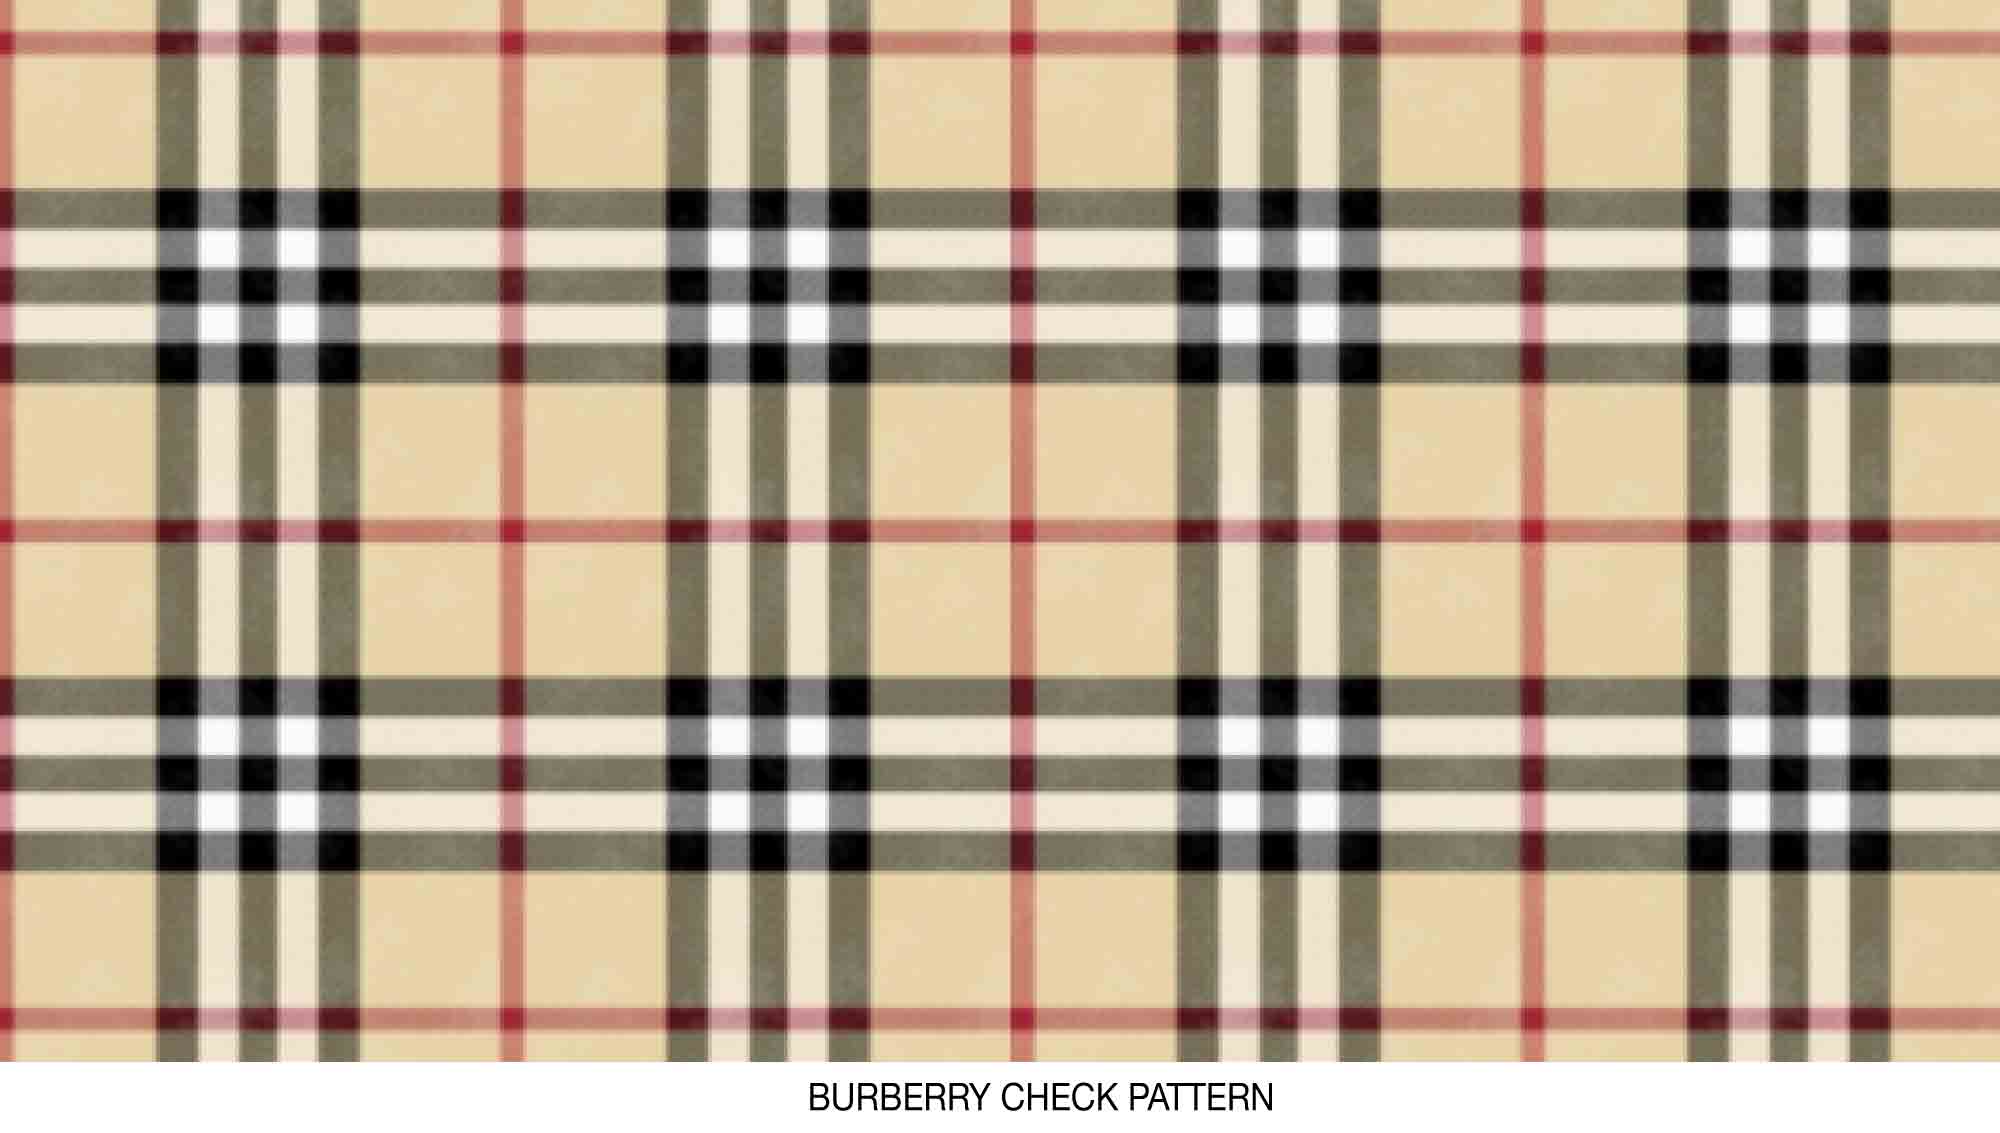 Burberry's New Course | Articles 